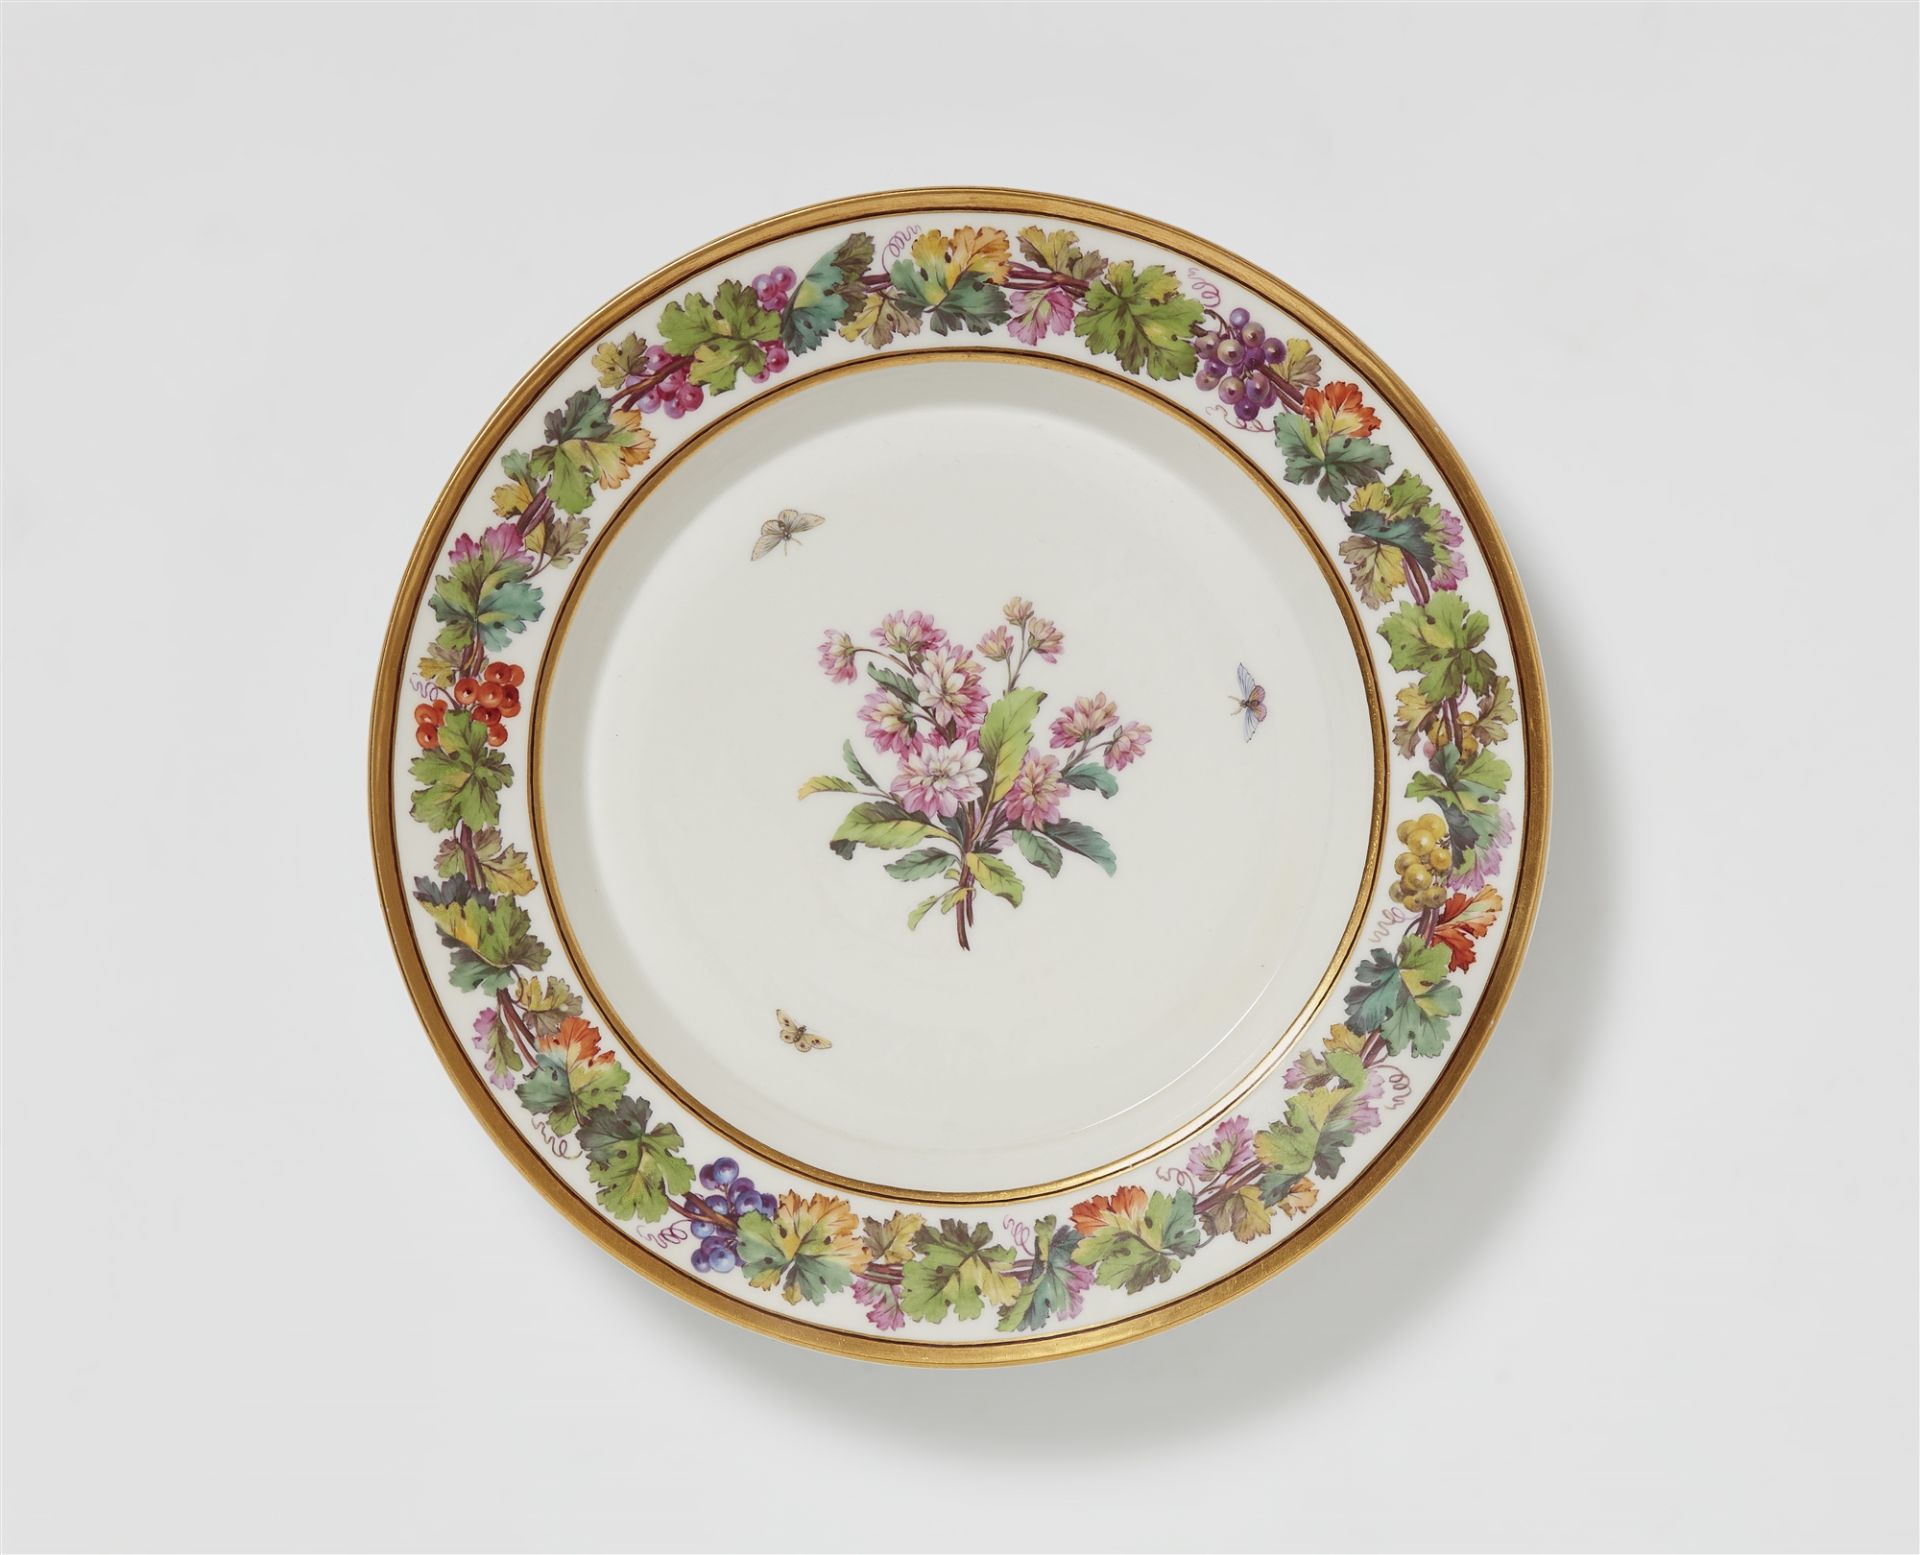 A Berlin KPM porcelain plate with chrysanthemums and moths